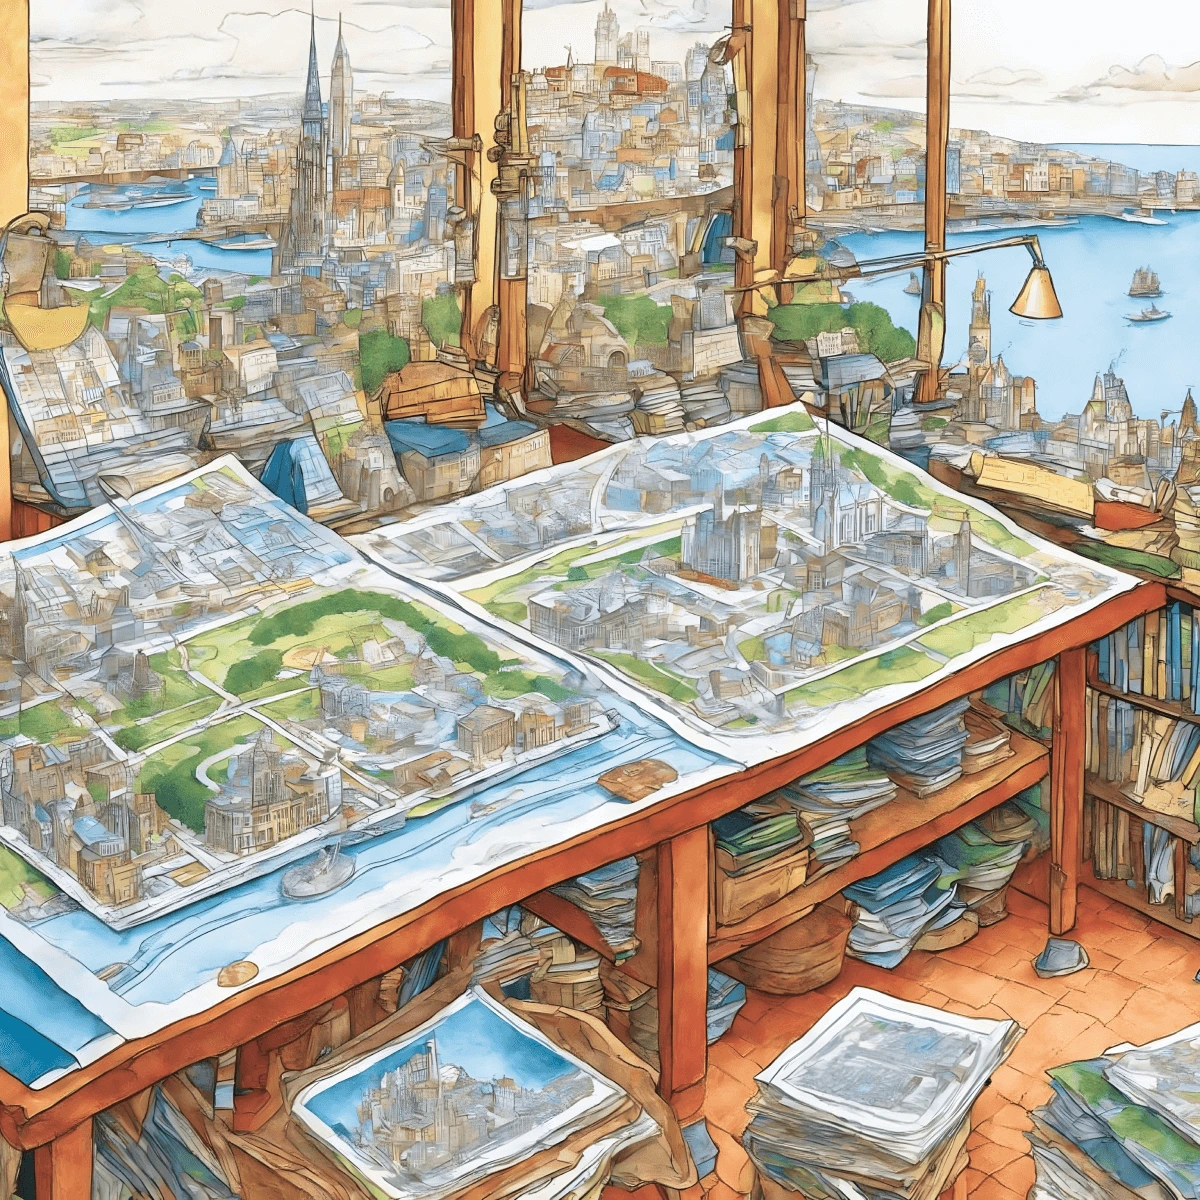 3D maps in a cartographer's study in watercolour style